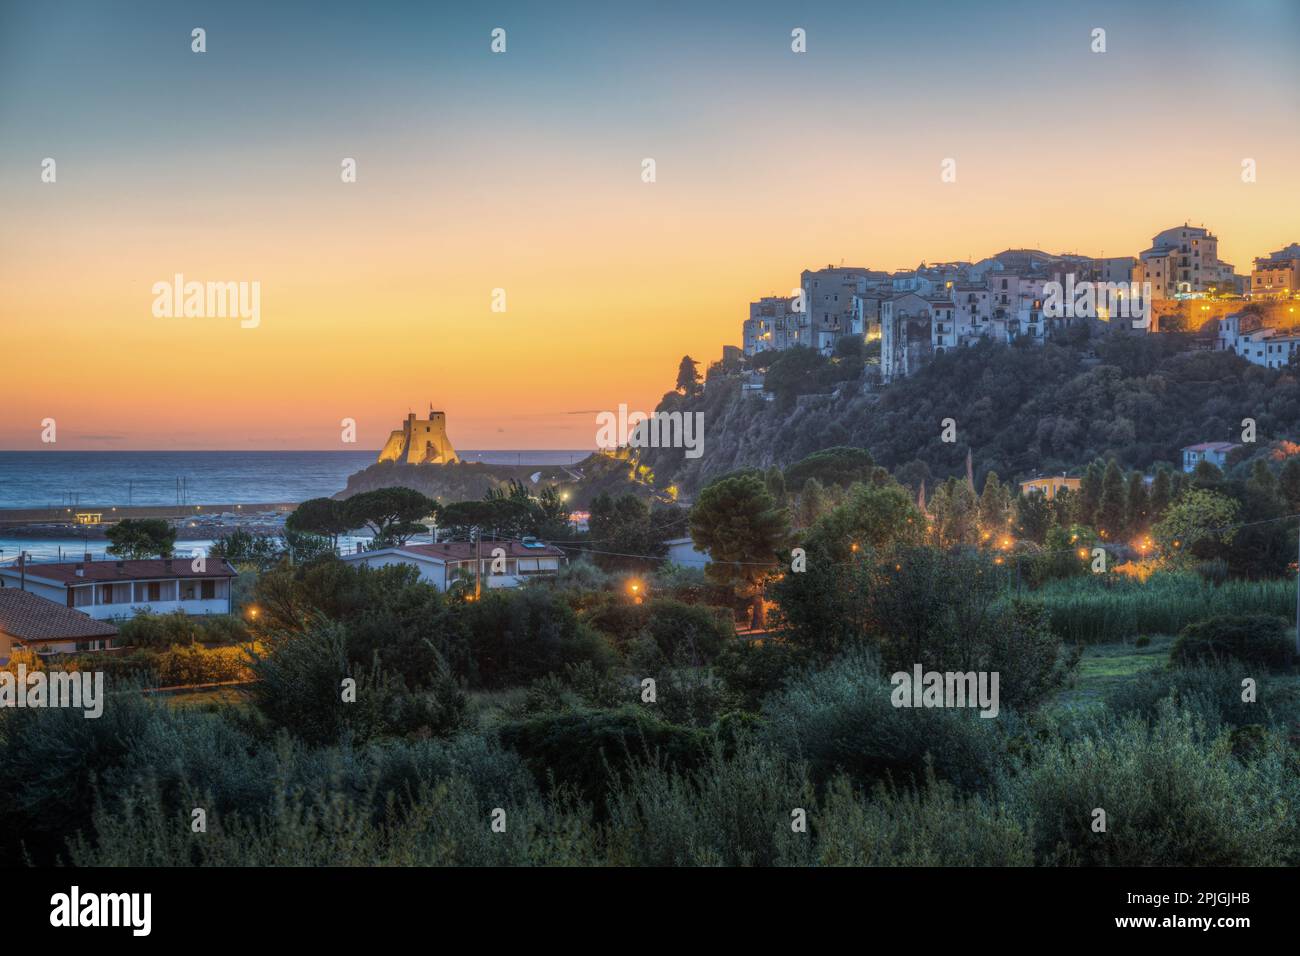 Scenic sunset at Sperlonga, a charming resort town with beautiful ...